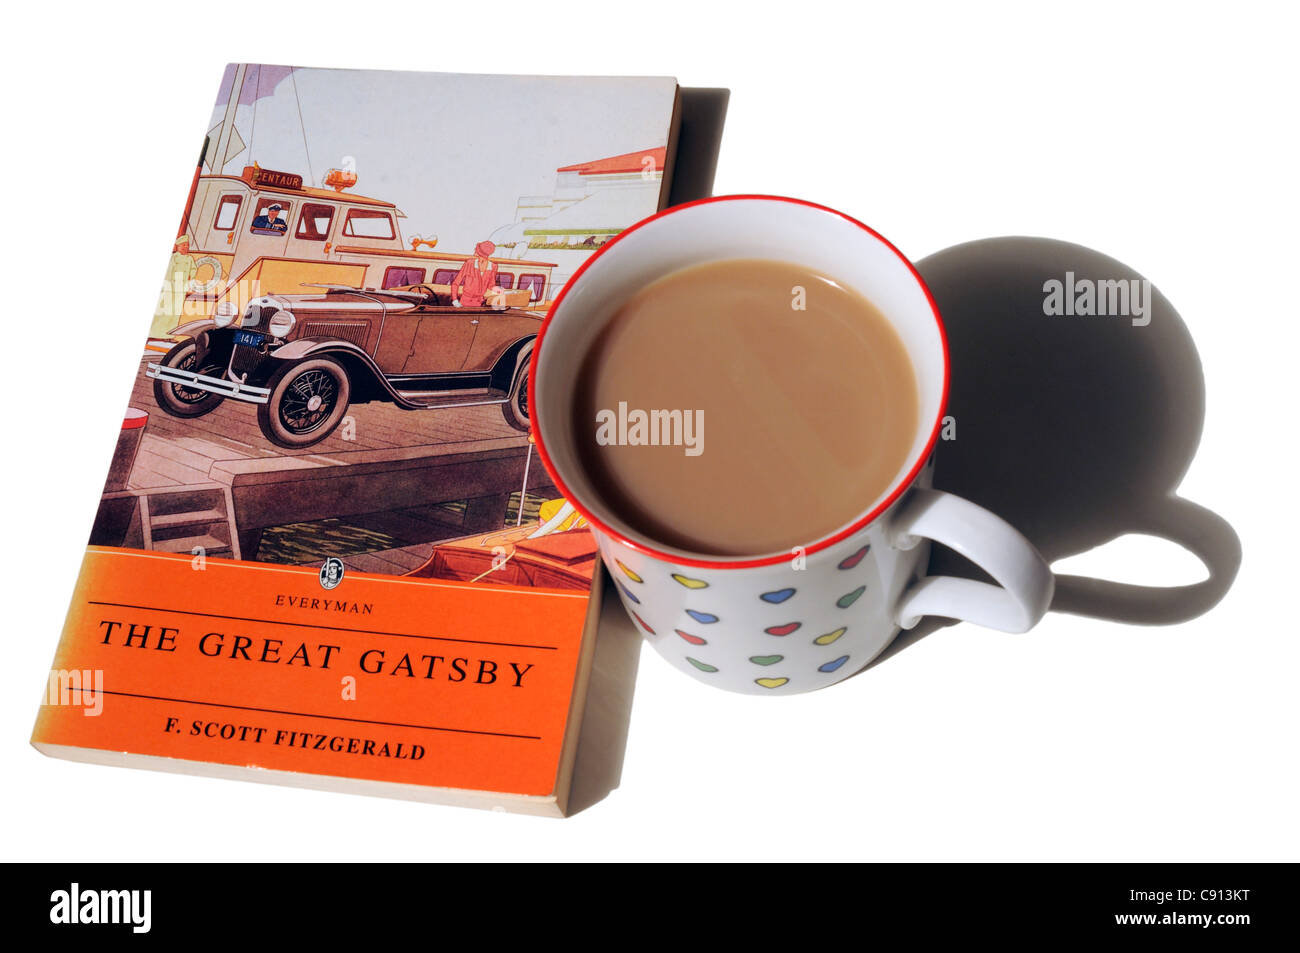 The Great Gatsby by F Scott Fitzgerald Stock Photo